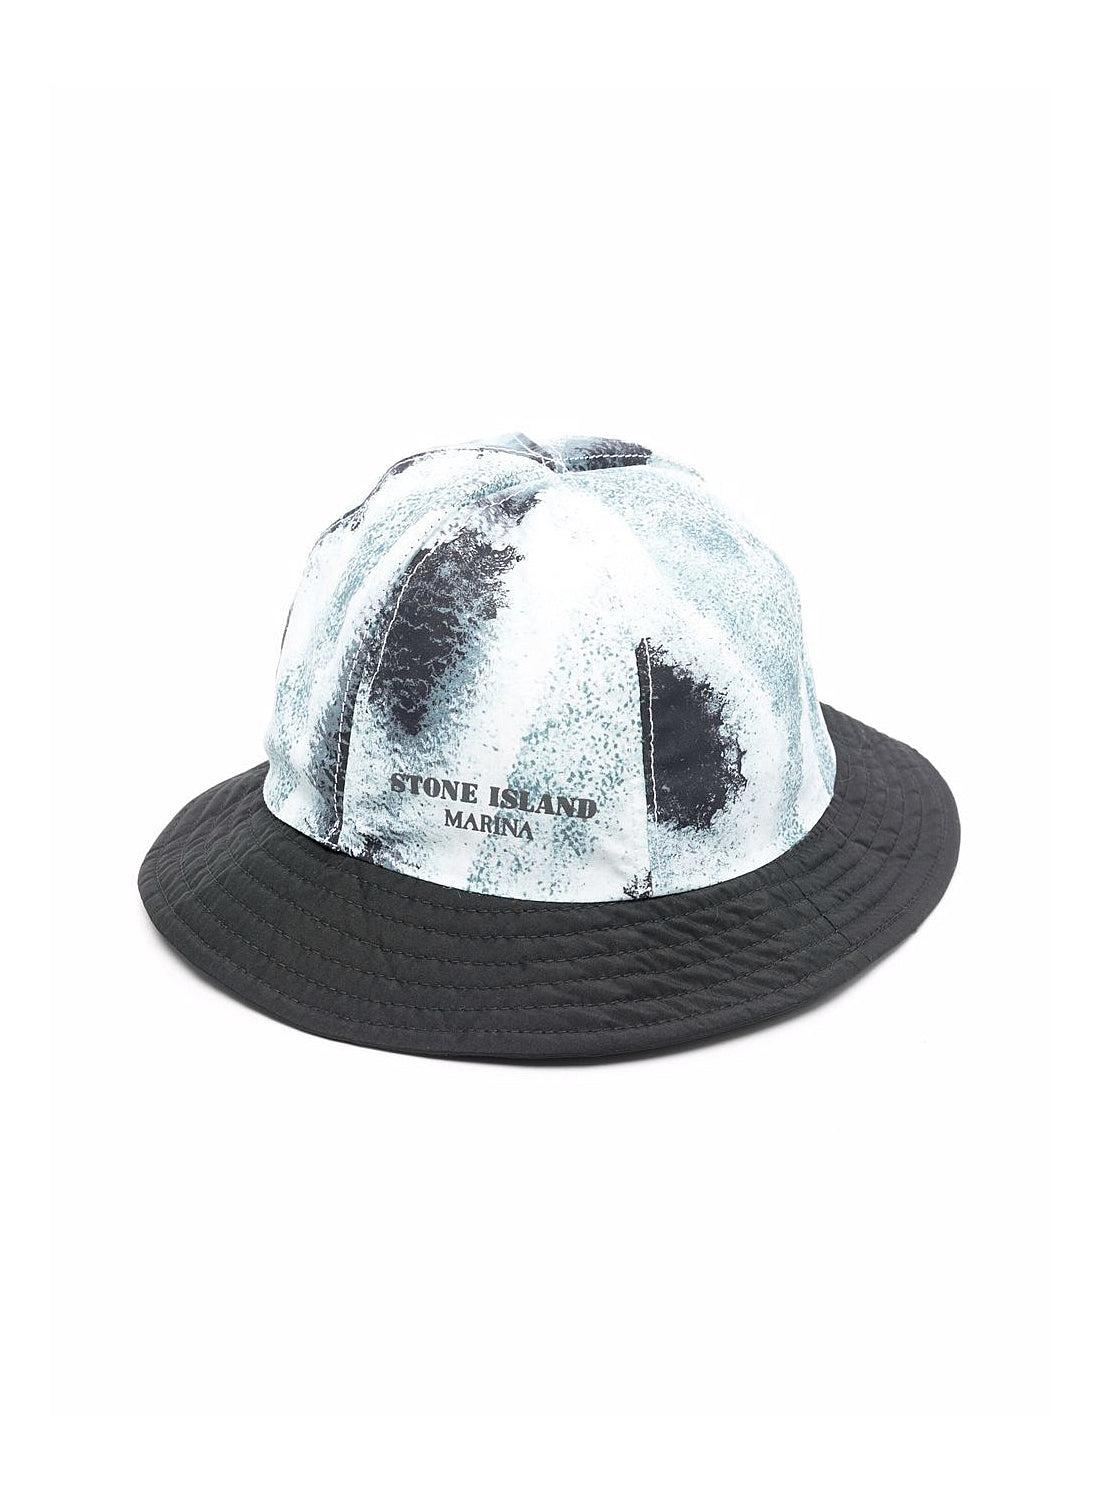 Stone Island 3l Gore-tex In Recycled Polyester/'reef Camo' Brushed Nylon Si  Marina Bucket Hat in Black for Men | Lyst